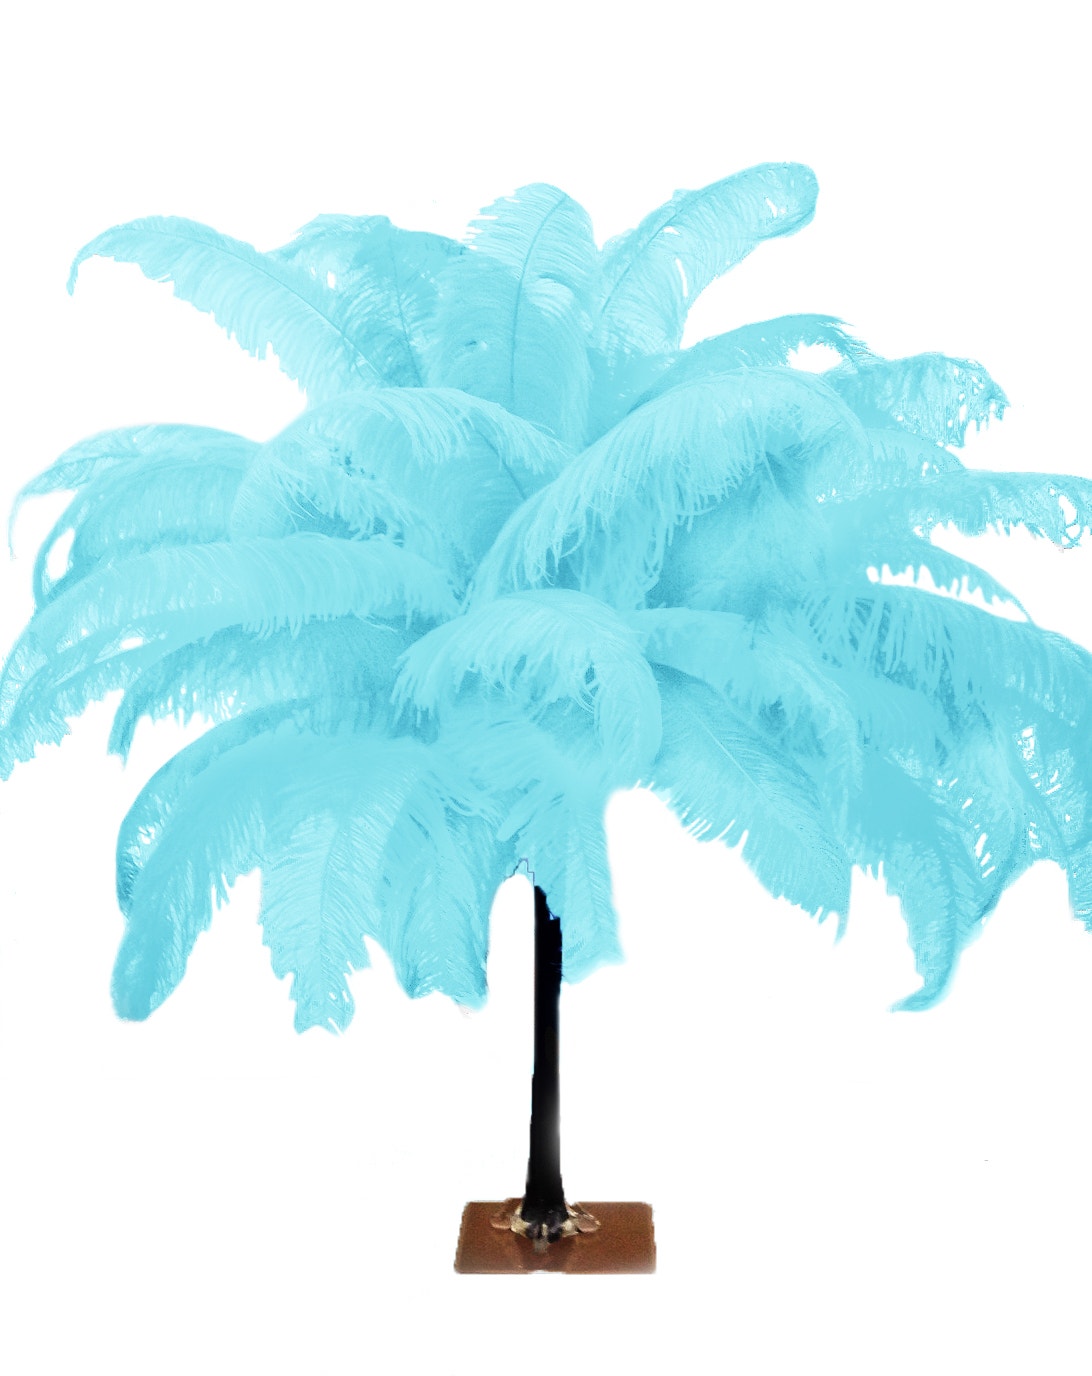 Large Ostrich Feathers - 18-24" Spads - Light Turquoise